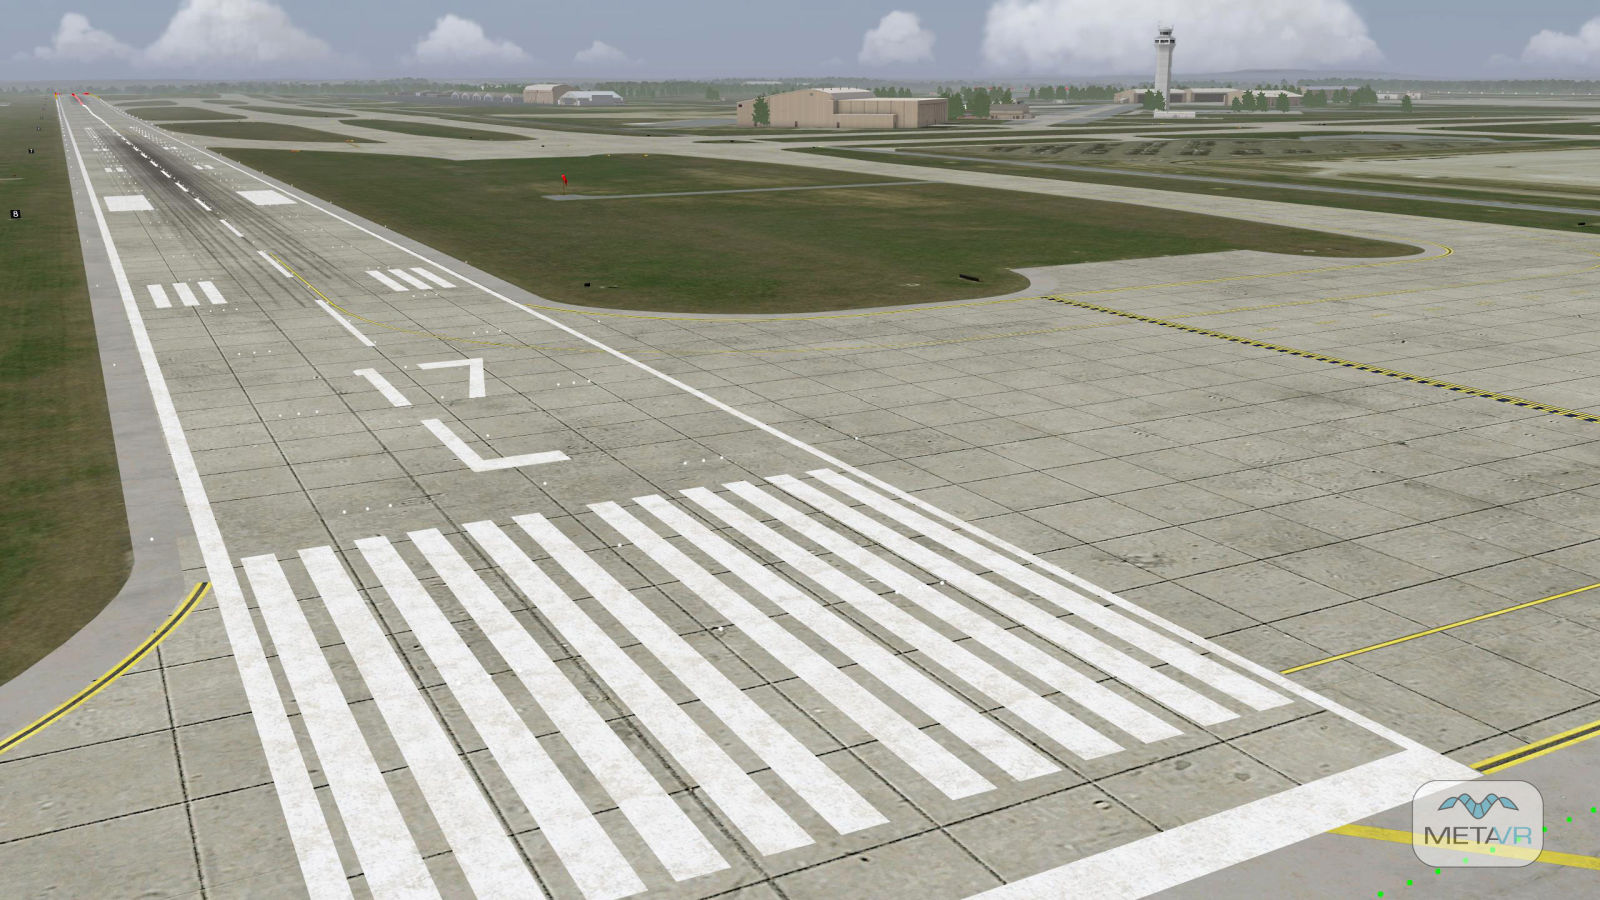 Illustration for article titled AUS Runway 17L/35R is no more